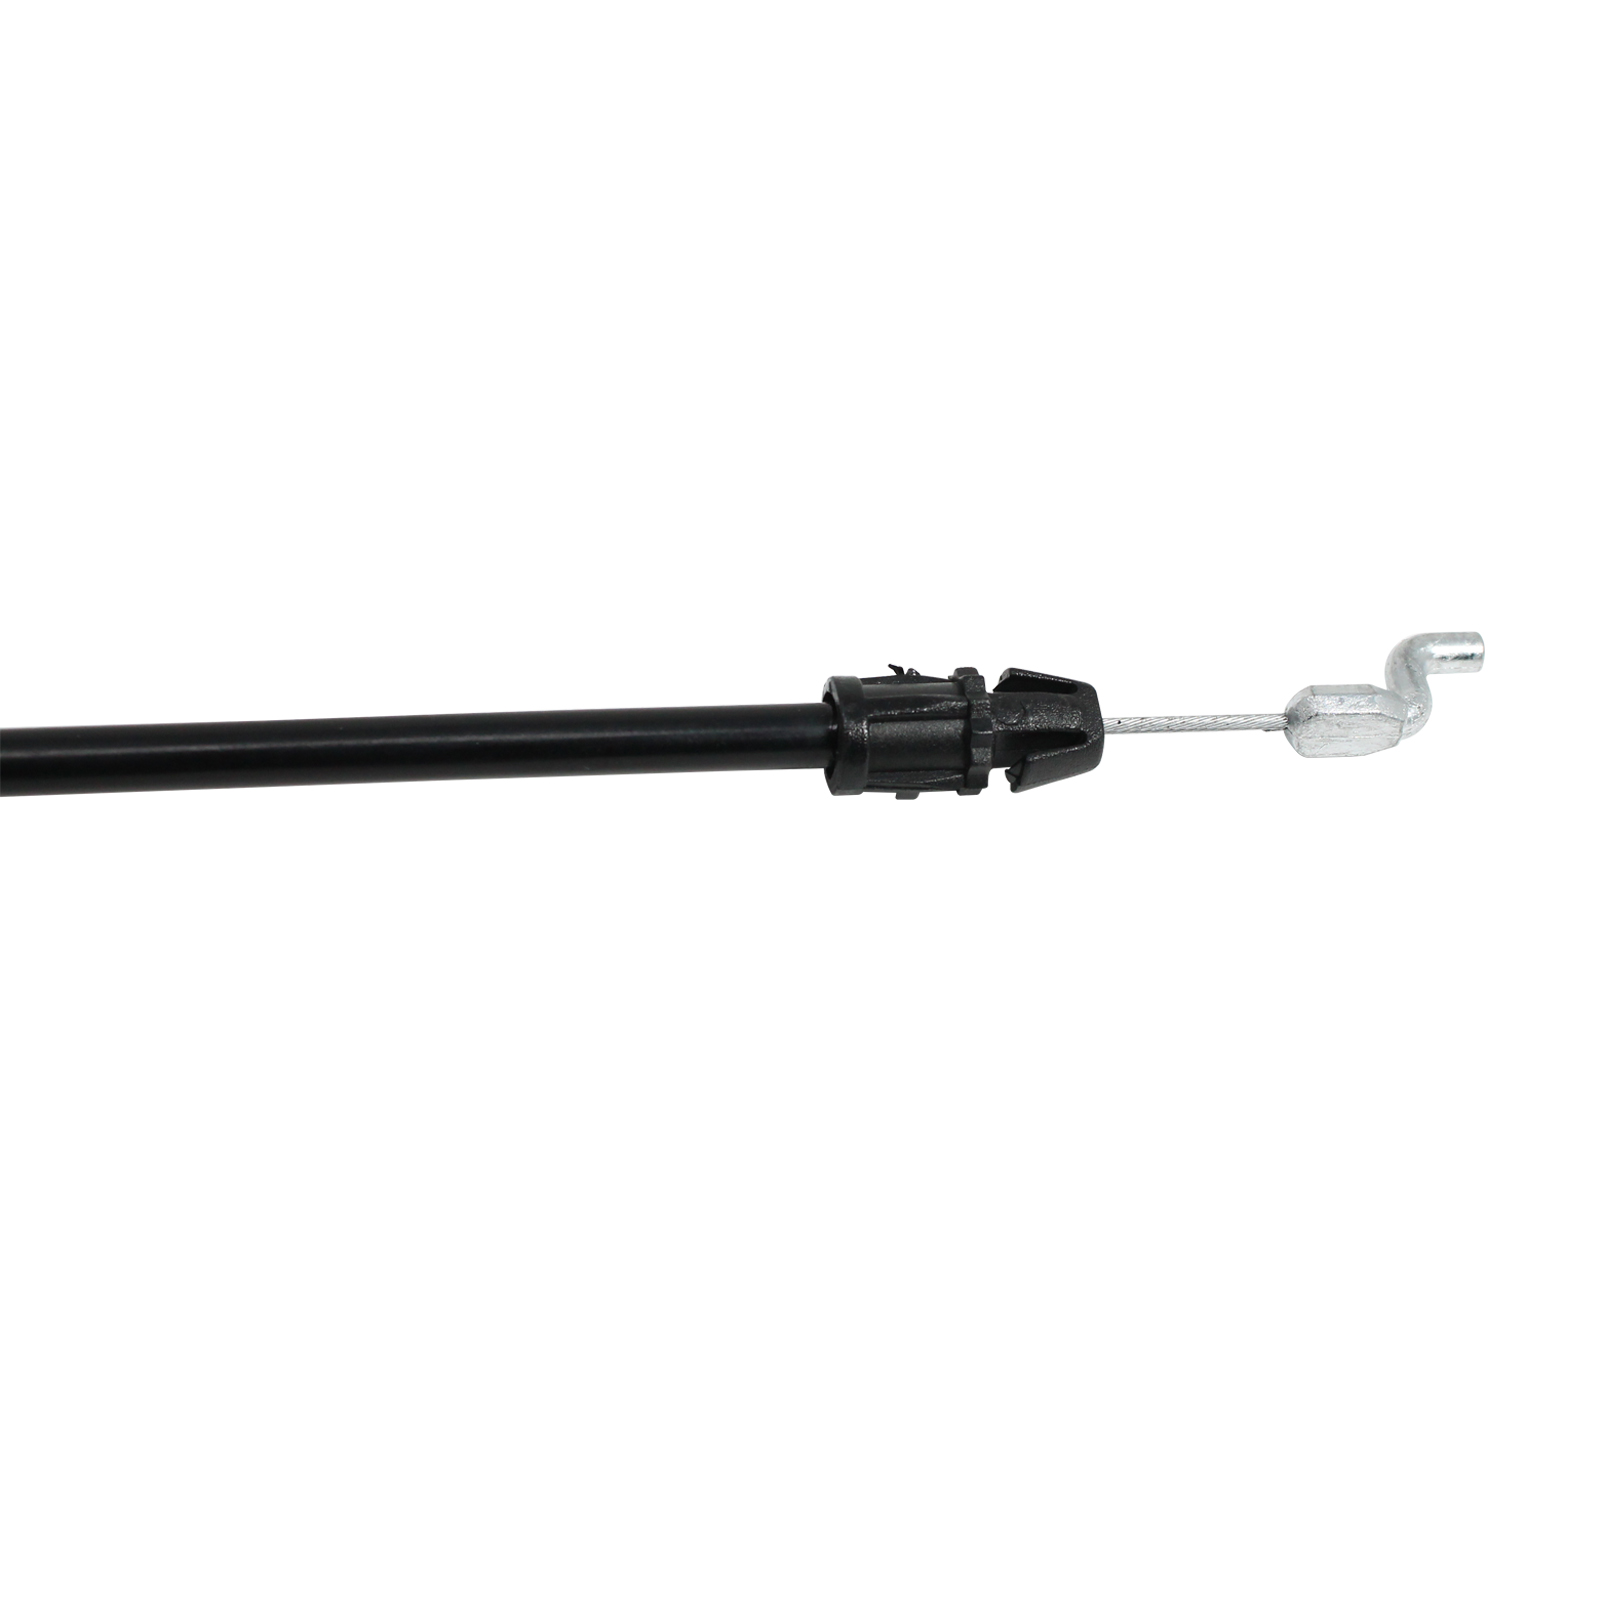 532176556 Engine Cable Replacement for Husqvarna ROTARY LAWN MOWER (96114000719) (2007-11) Lawn Mower: Consumer Walk Behind - Compatible with 176556 162778 Zone Control Cable - image 3 of 4